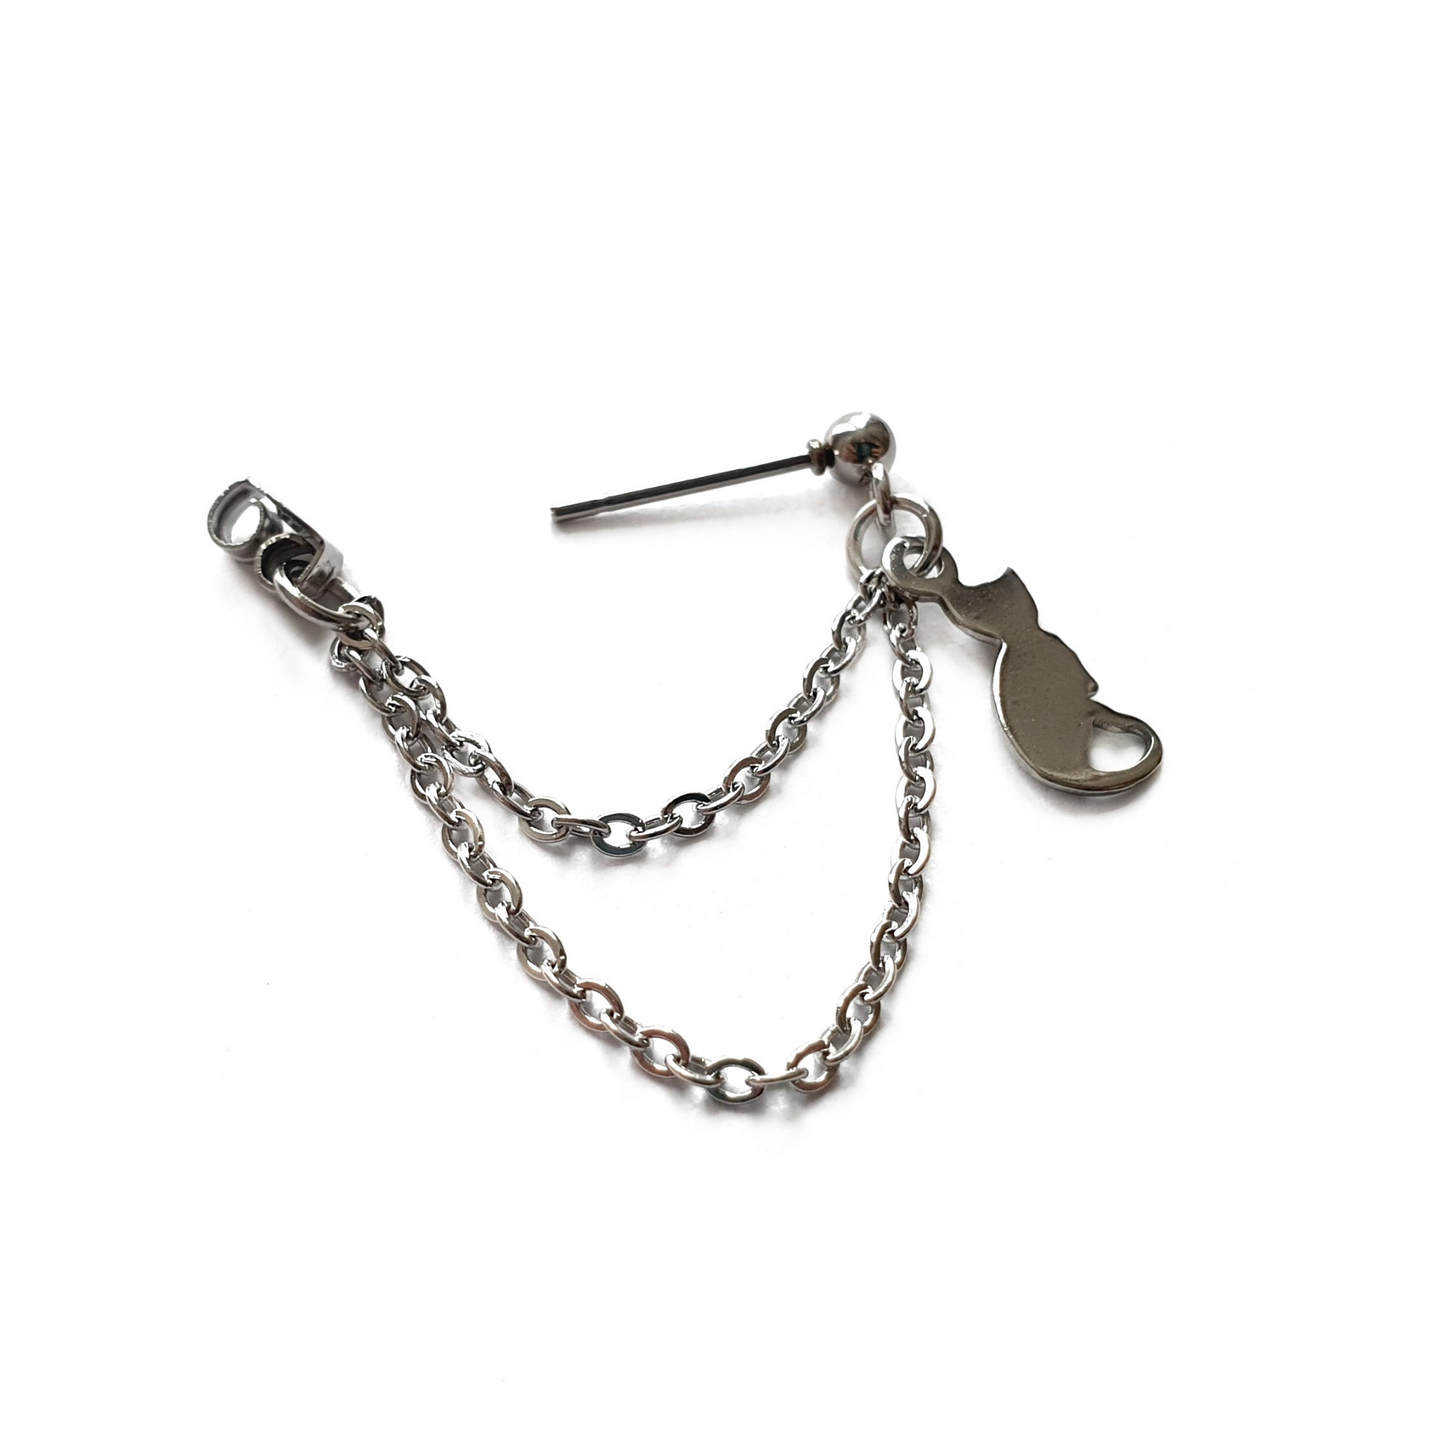 Cat Helix Cartilage Earring. Stainless Steel Double Chain Earring with Cat Charm.